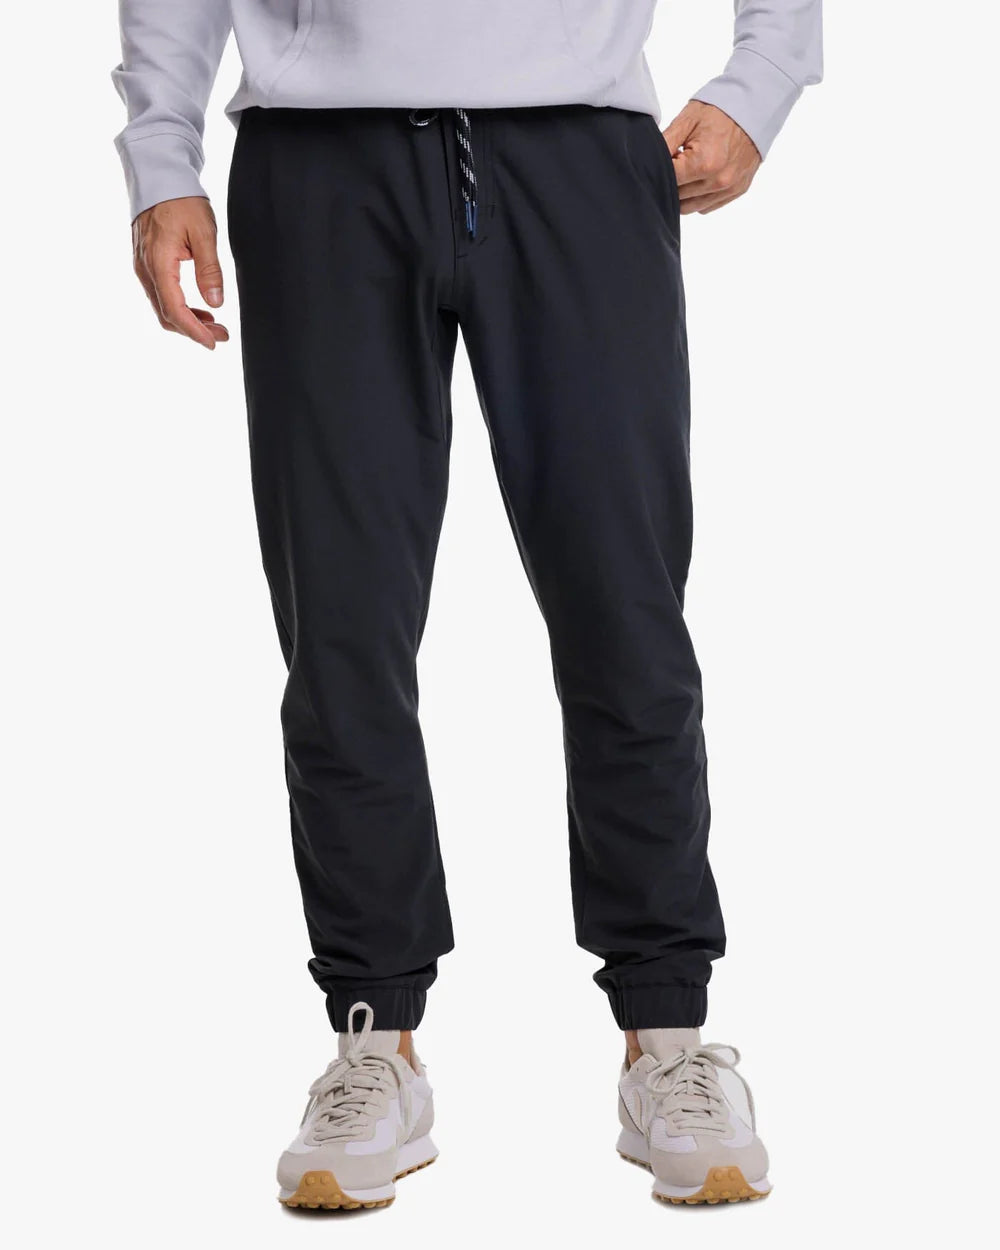 Southern Tide The Excursion Performance Jogger - Caviar Black